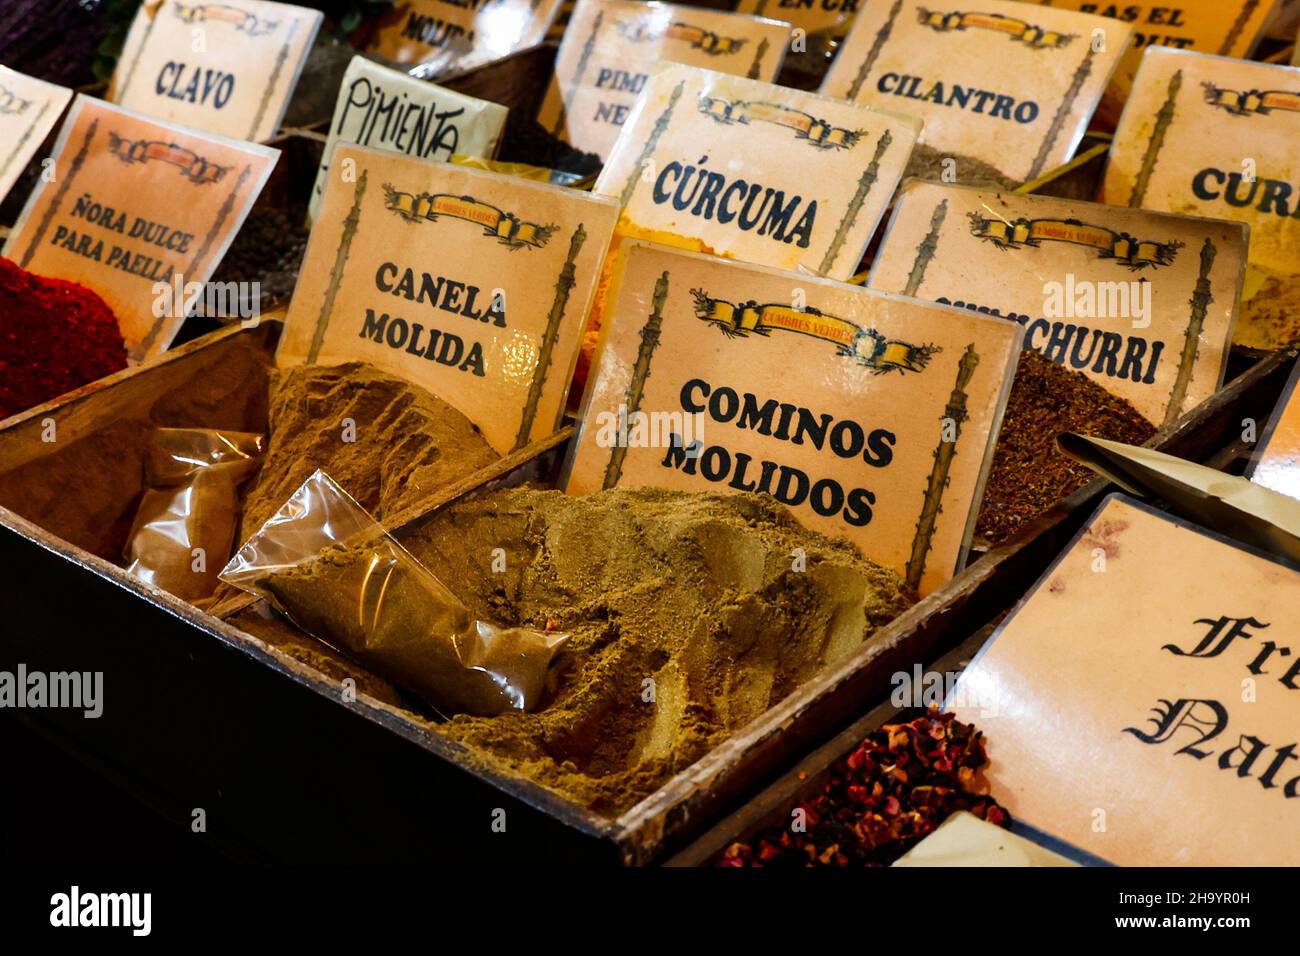 Spices for sale on a market stall in Vic, Catalonia, Spain Stock Photo